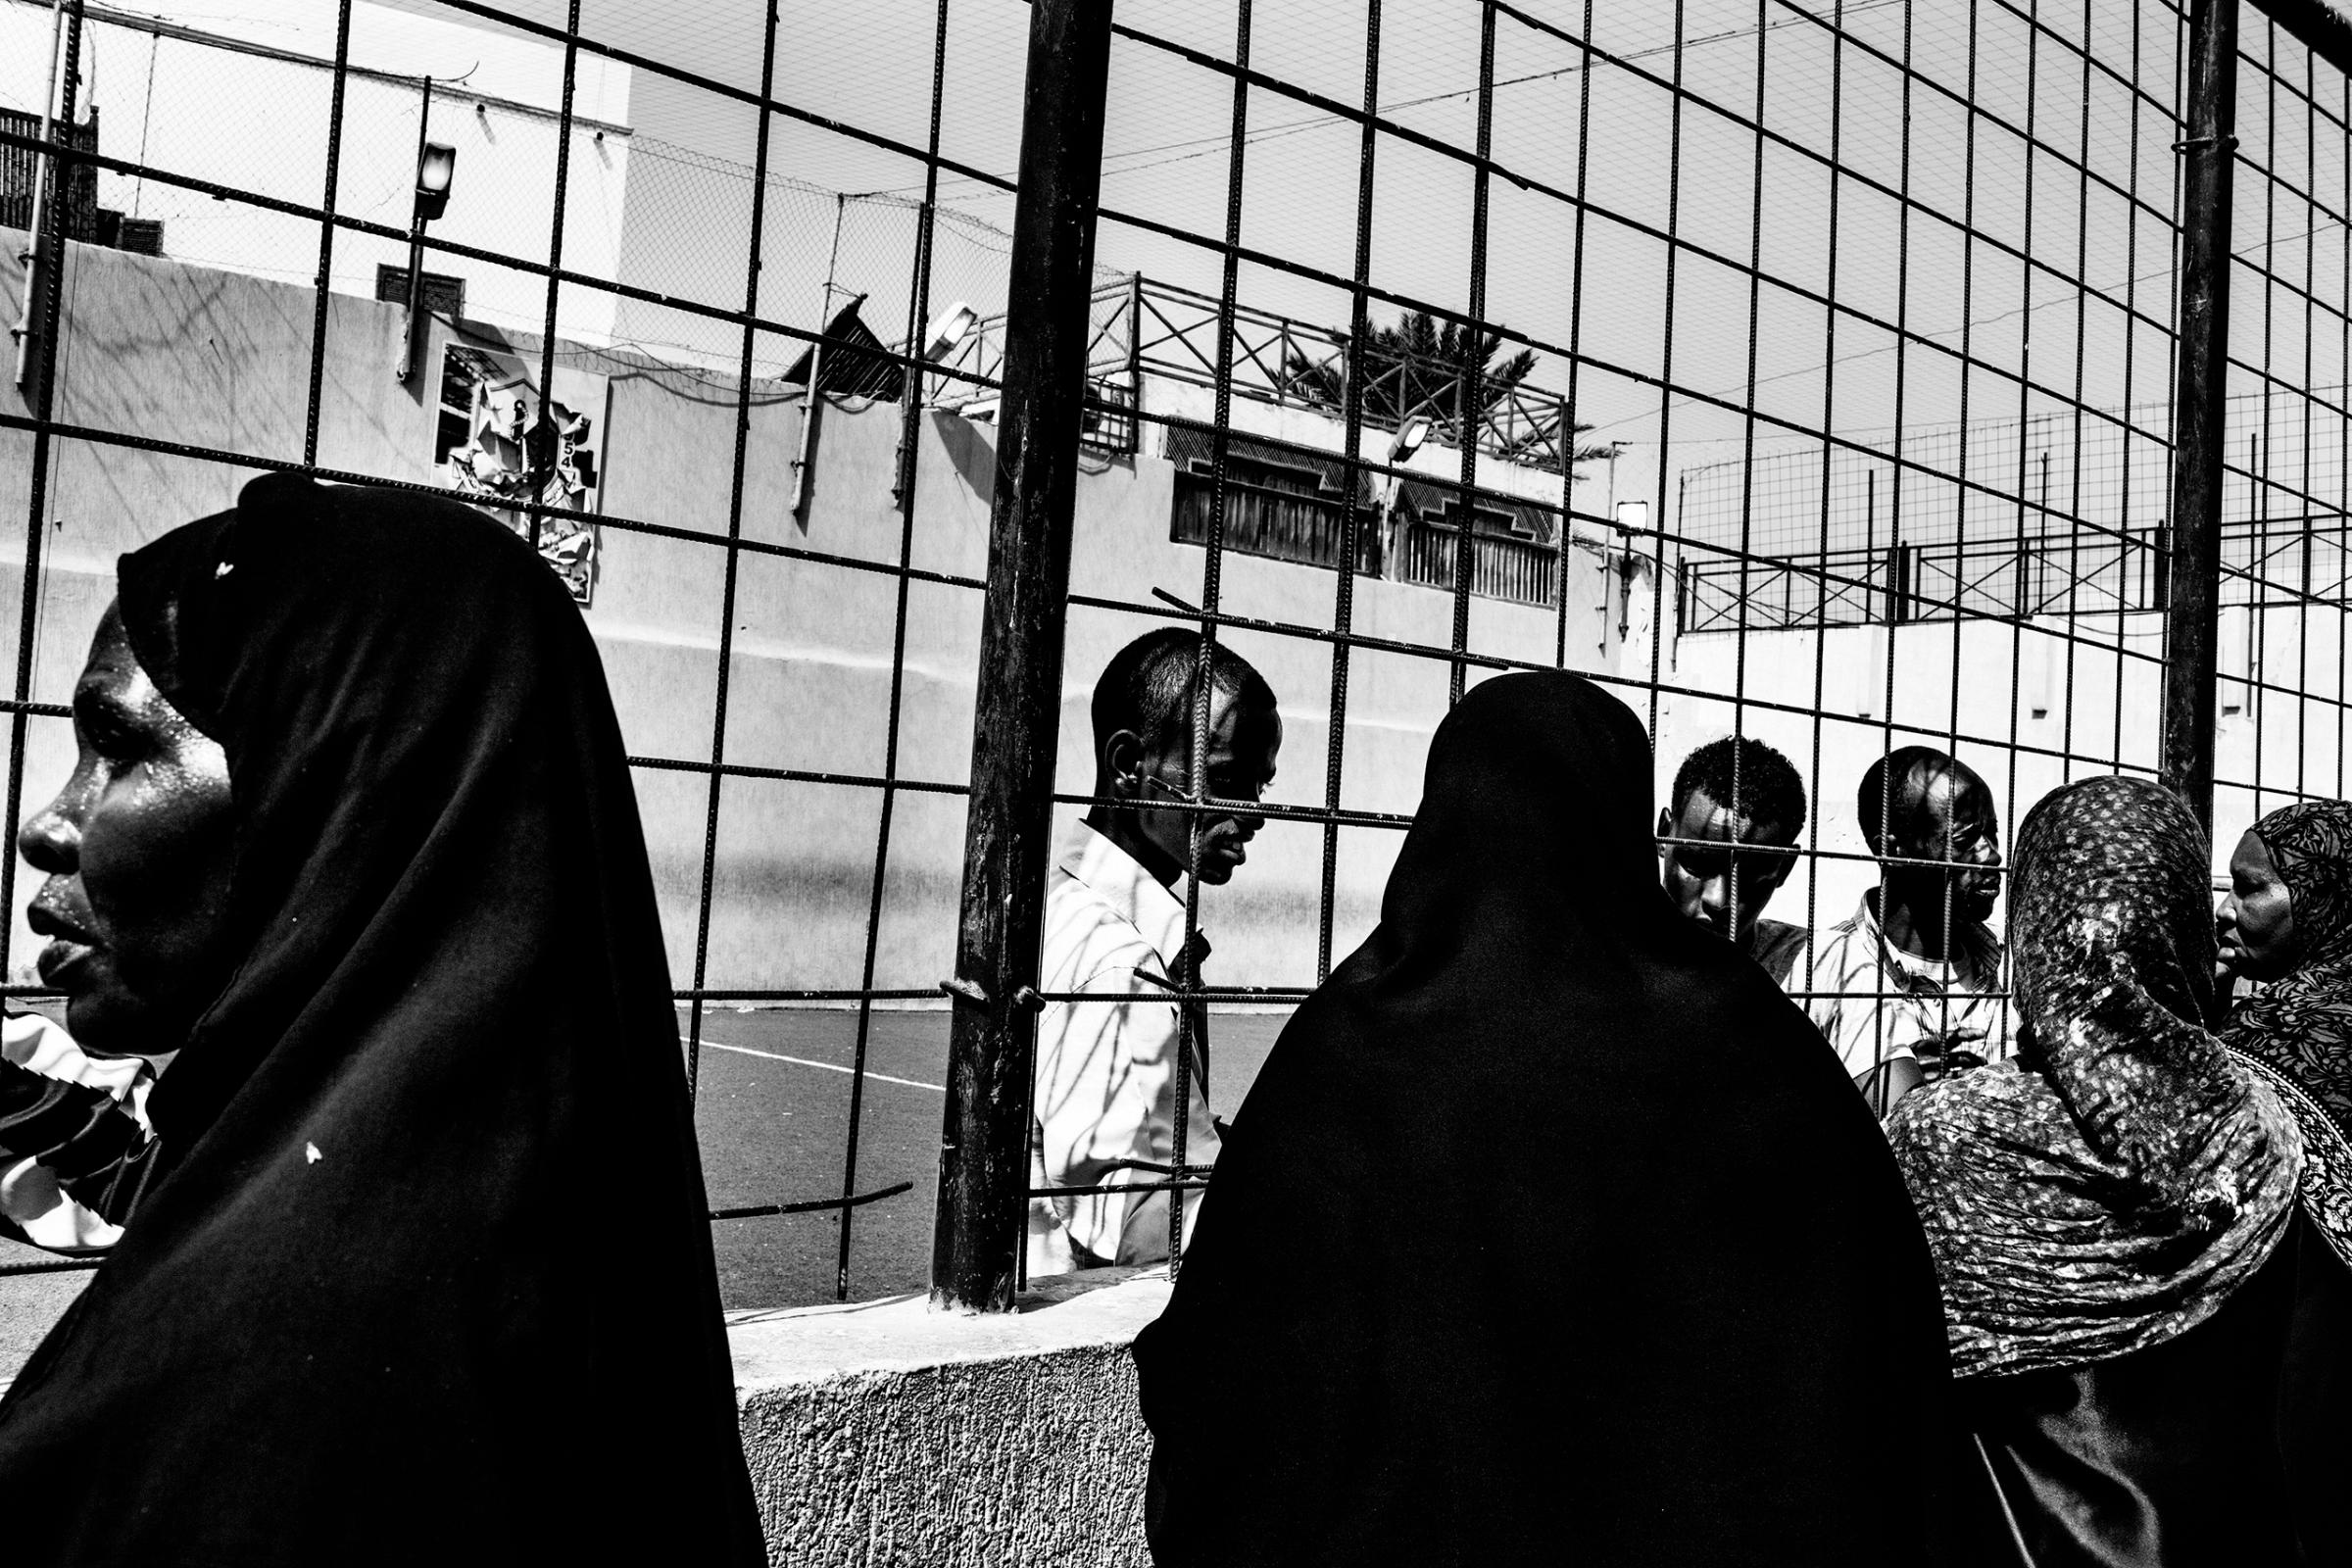 Women talk with thier housbands, suspected to be Gaddafi's mercenaries, imprisoned in a football field converted into a prison, Tripoli on September 2, 2011.